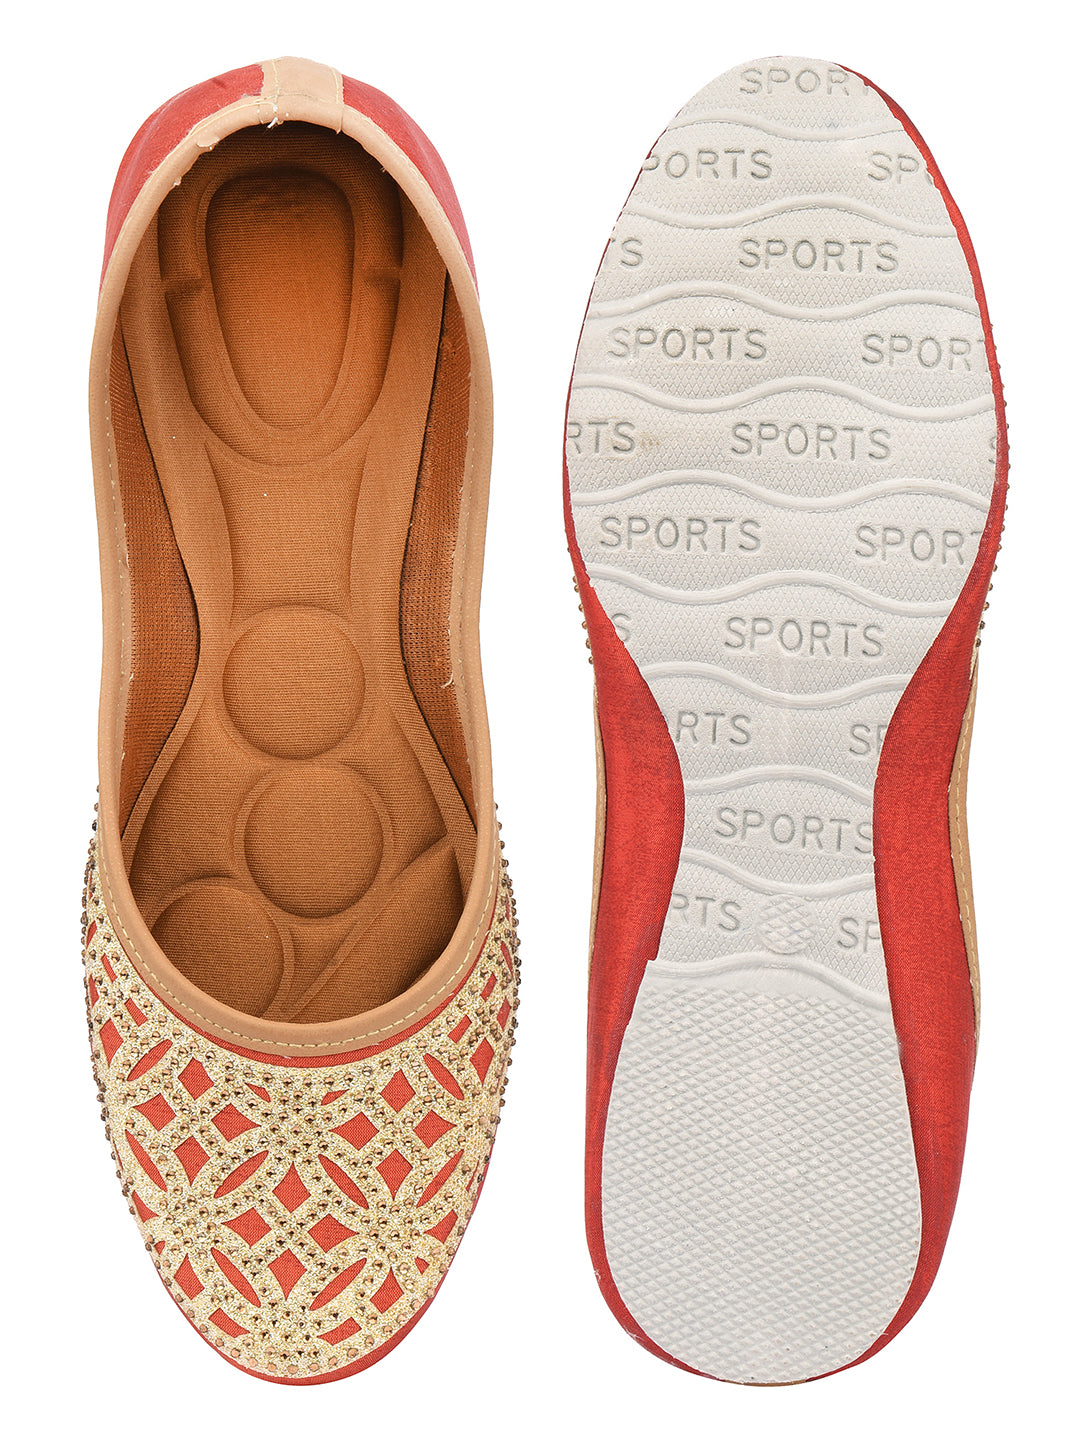 DESI COLOUR Women Red Embellished Mojaris with Laser Cuts Flats